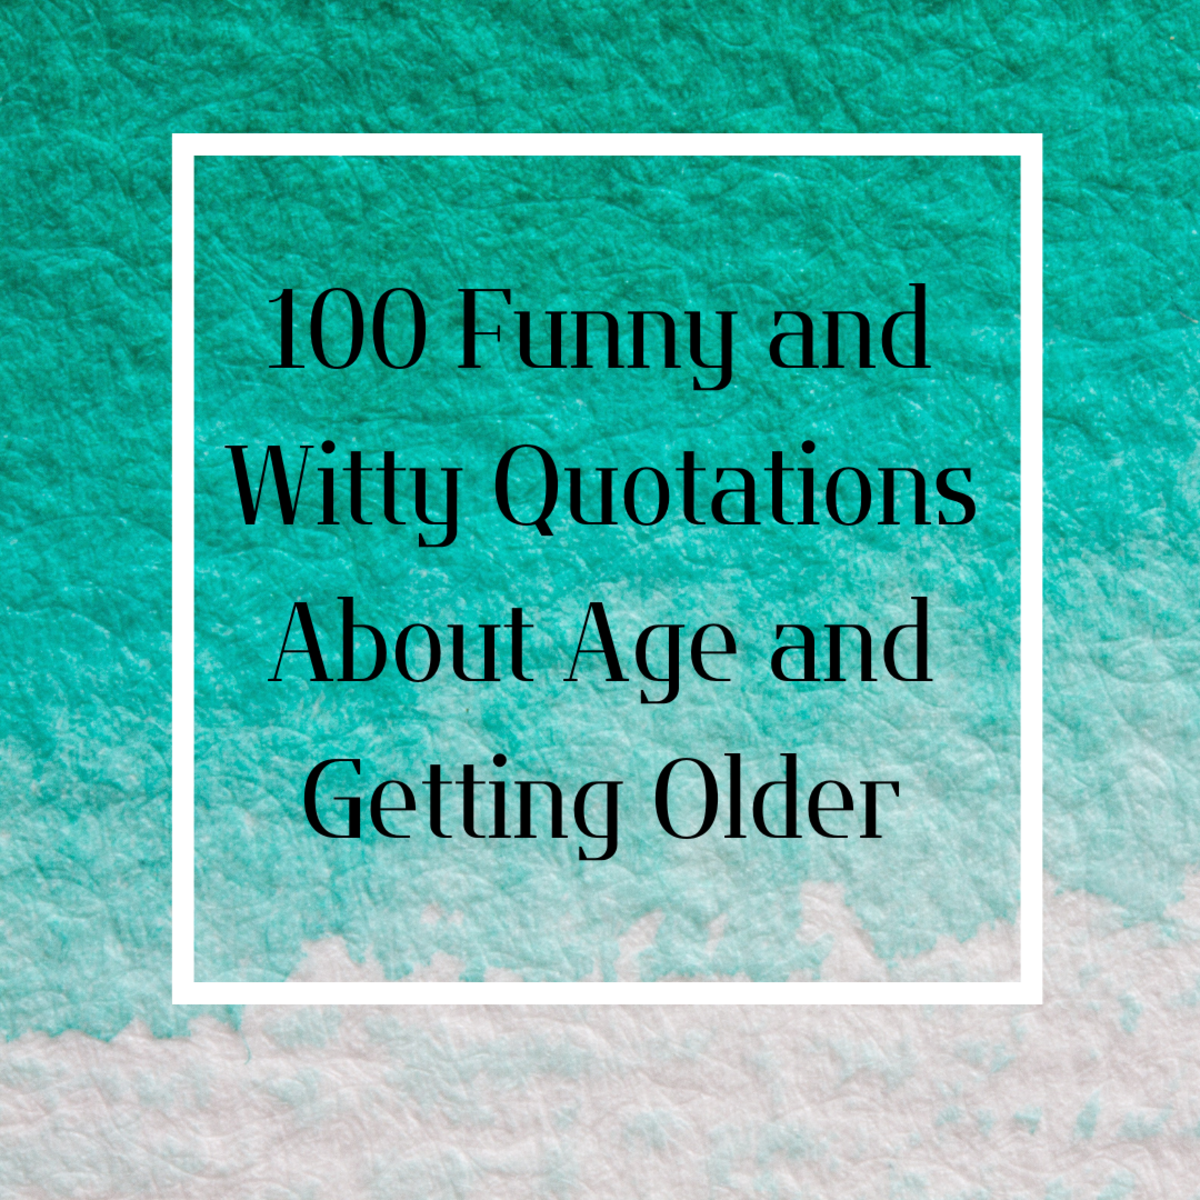 Here are 100 funny and witty quotations about getting older. 